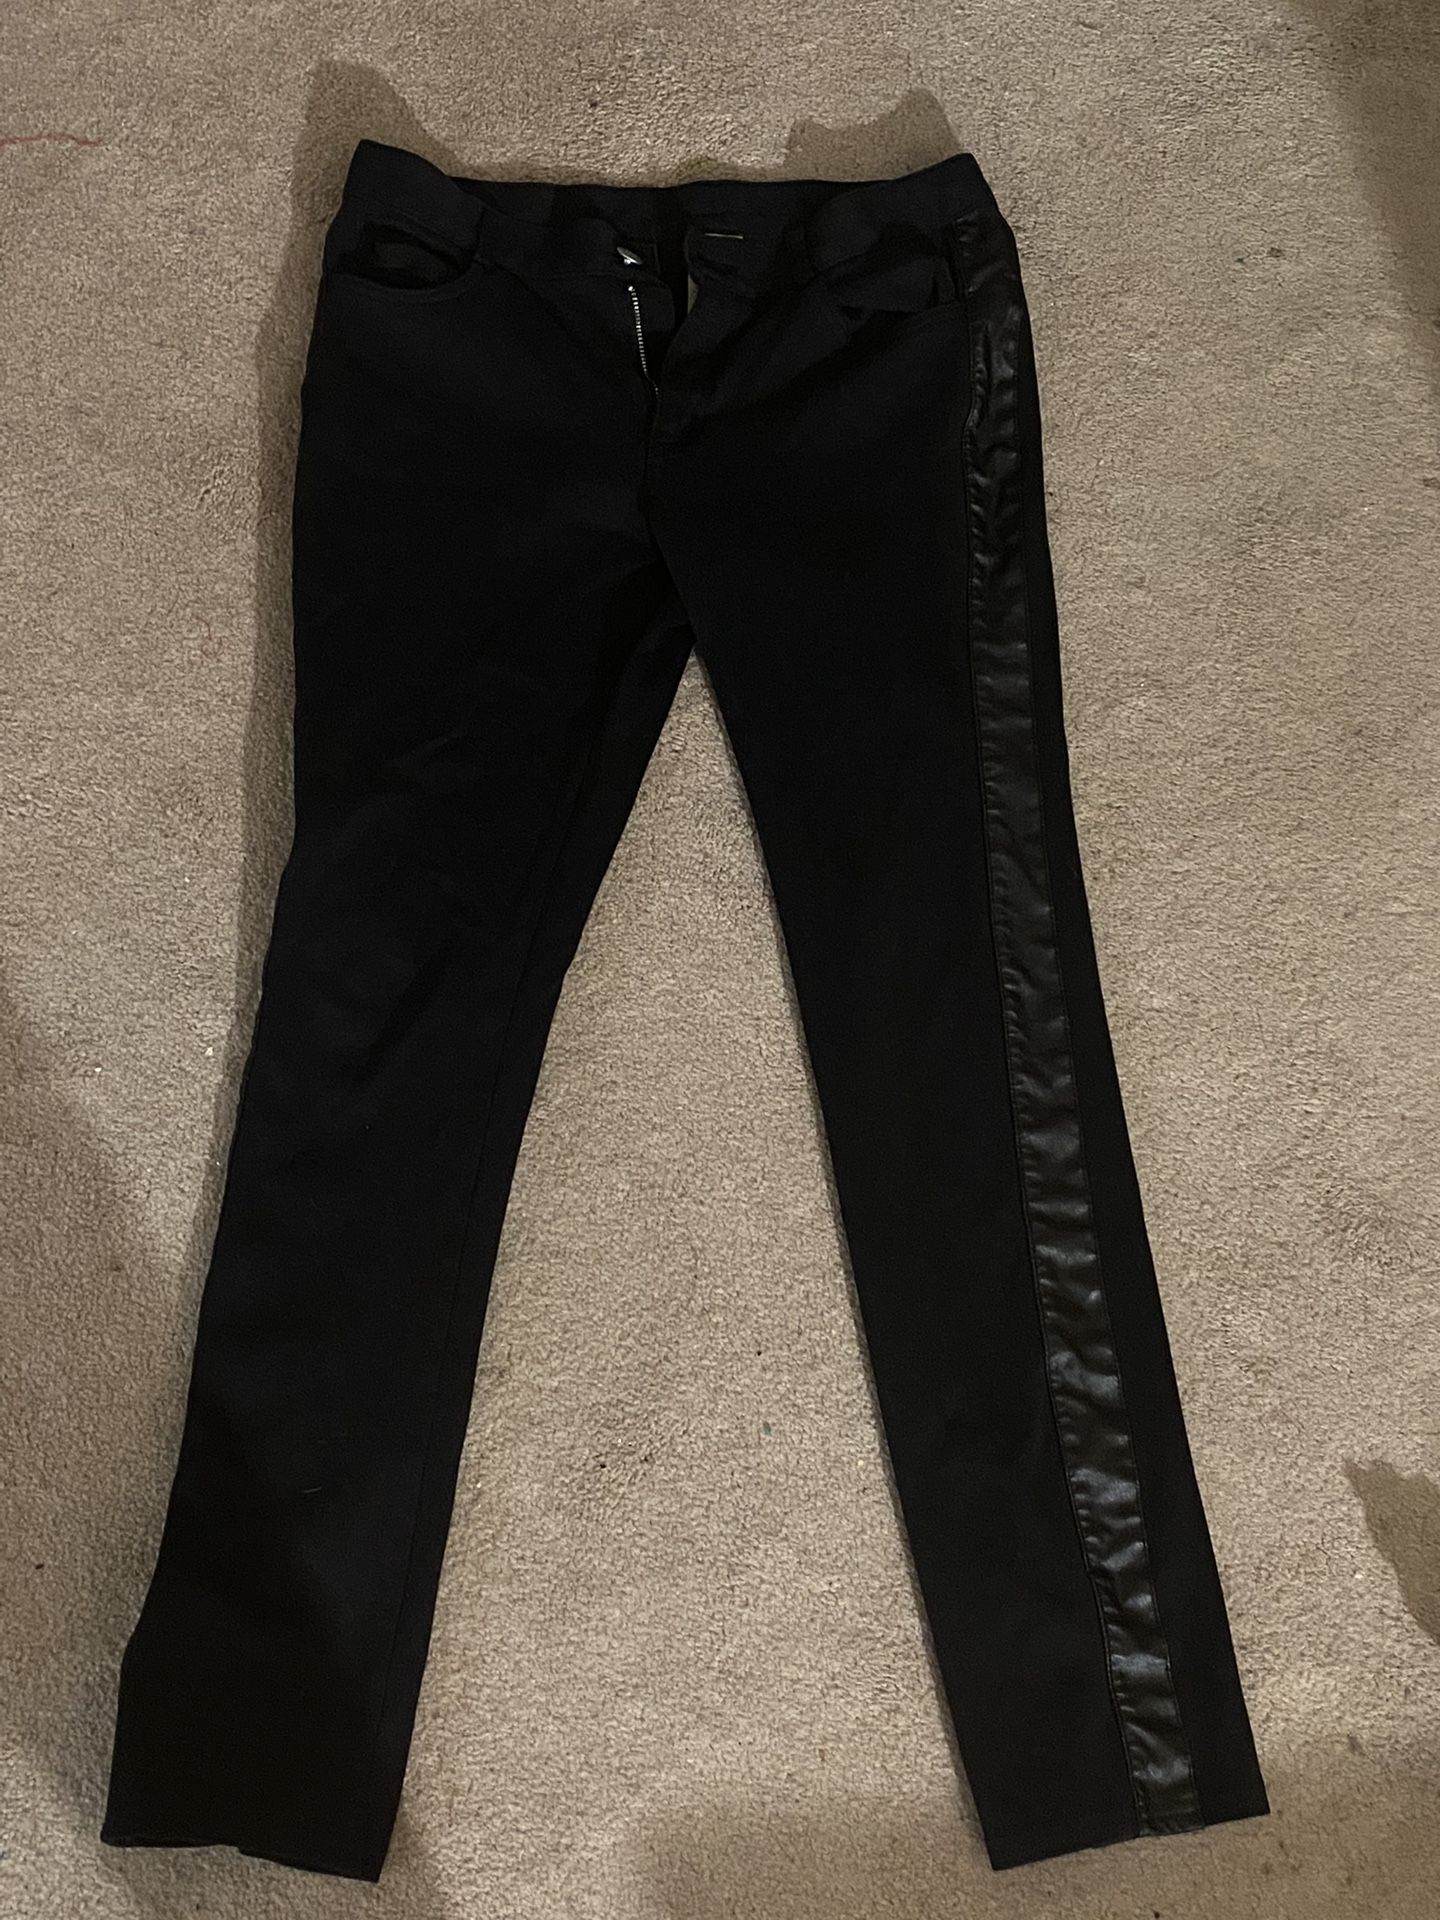 Black Jeans With Leather On The Sides